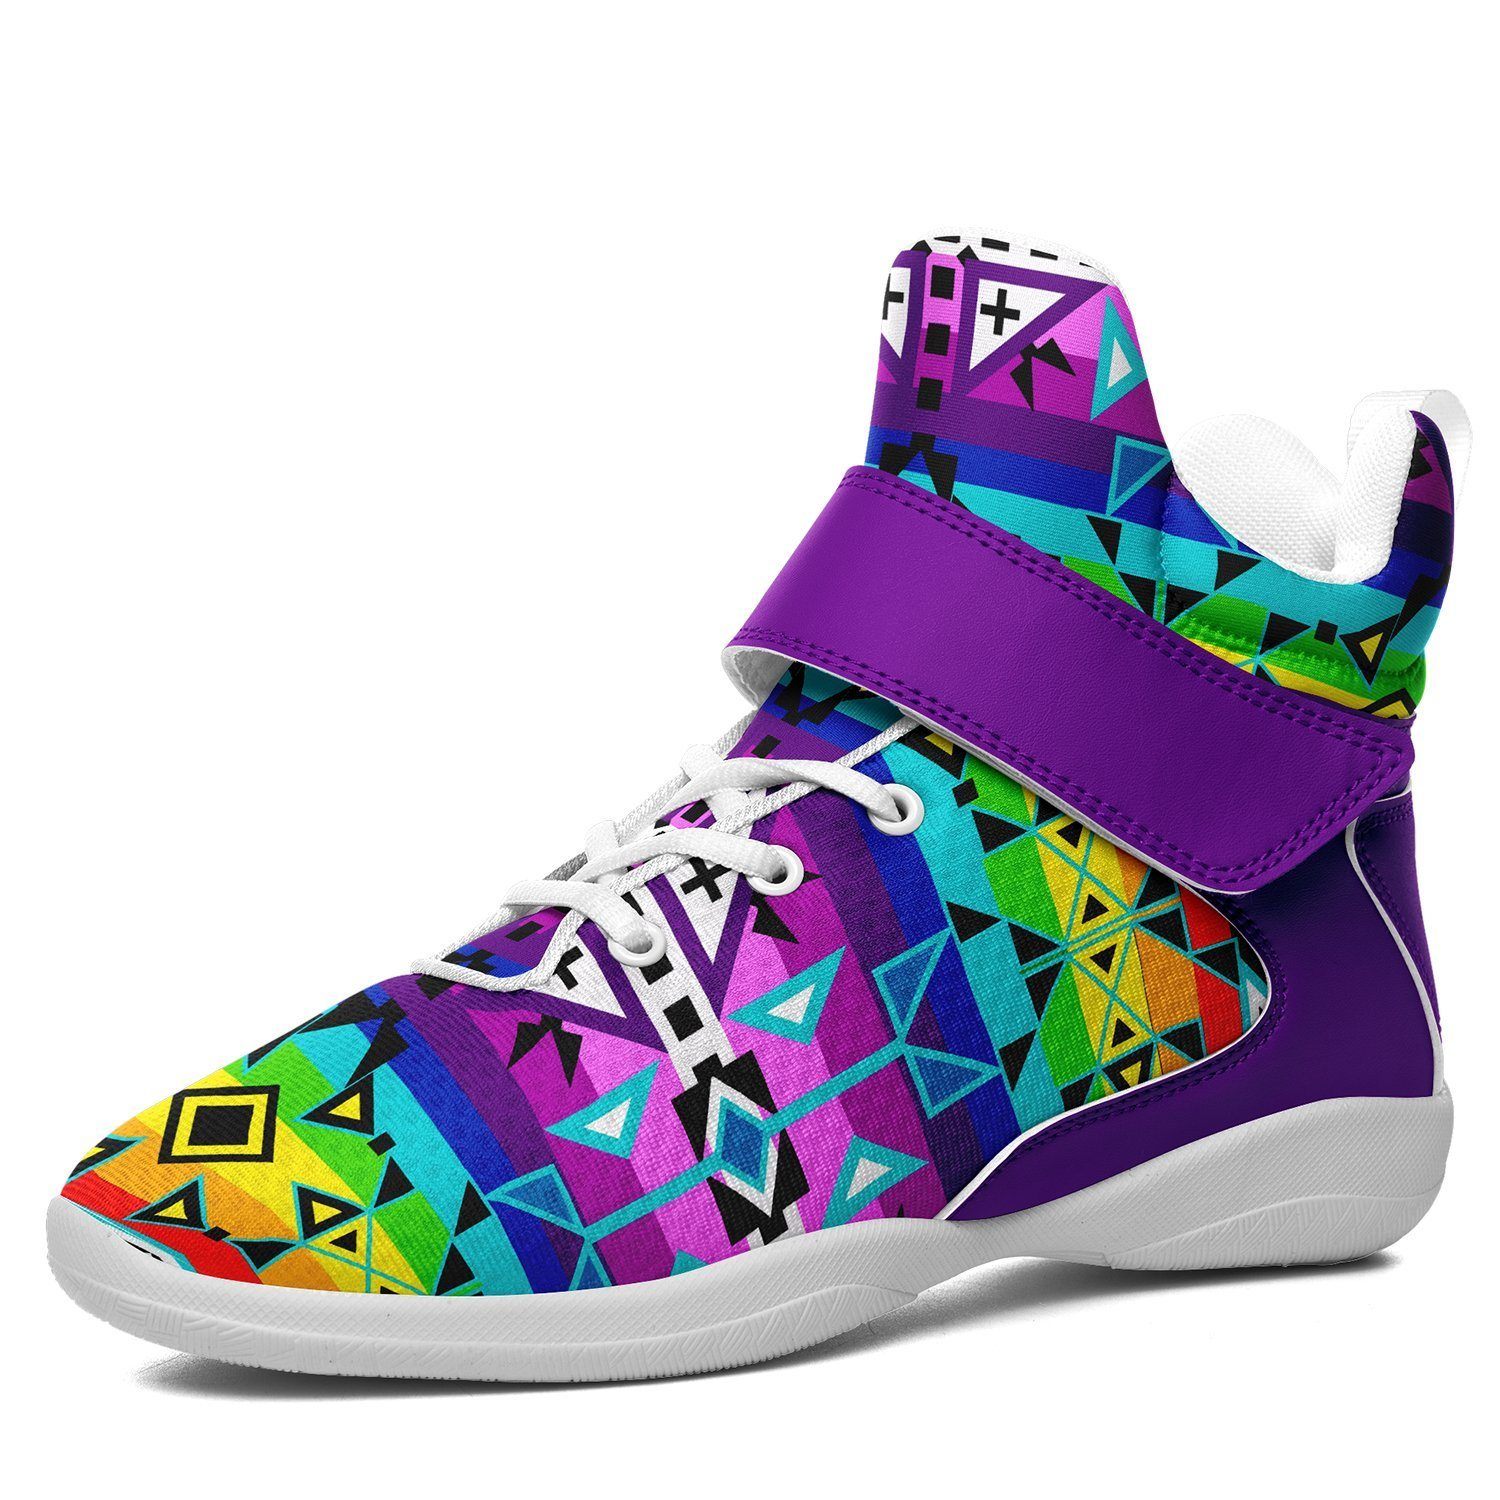 After the Rain Kid's Ipottaa Basketball / Sport High Top Shoes 49 Dzine US Child 12.5 / EUR 30 White Sole with Indigo Strap 